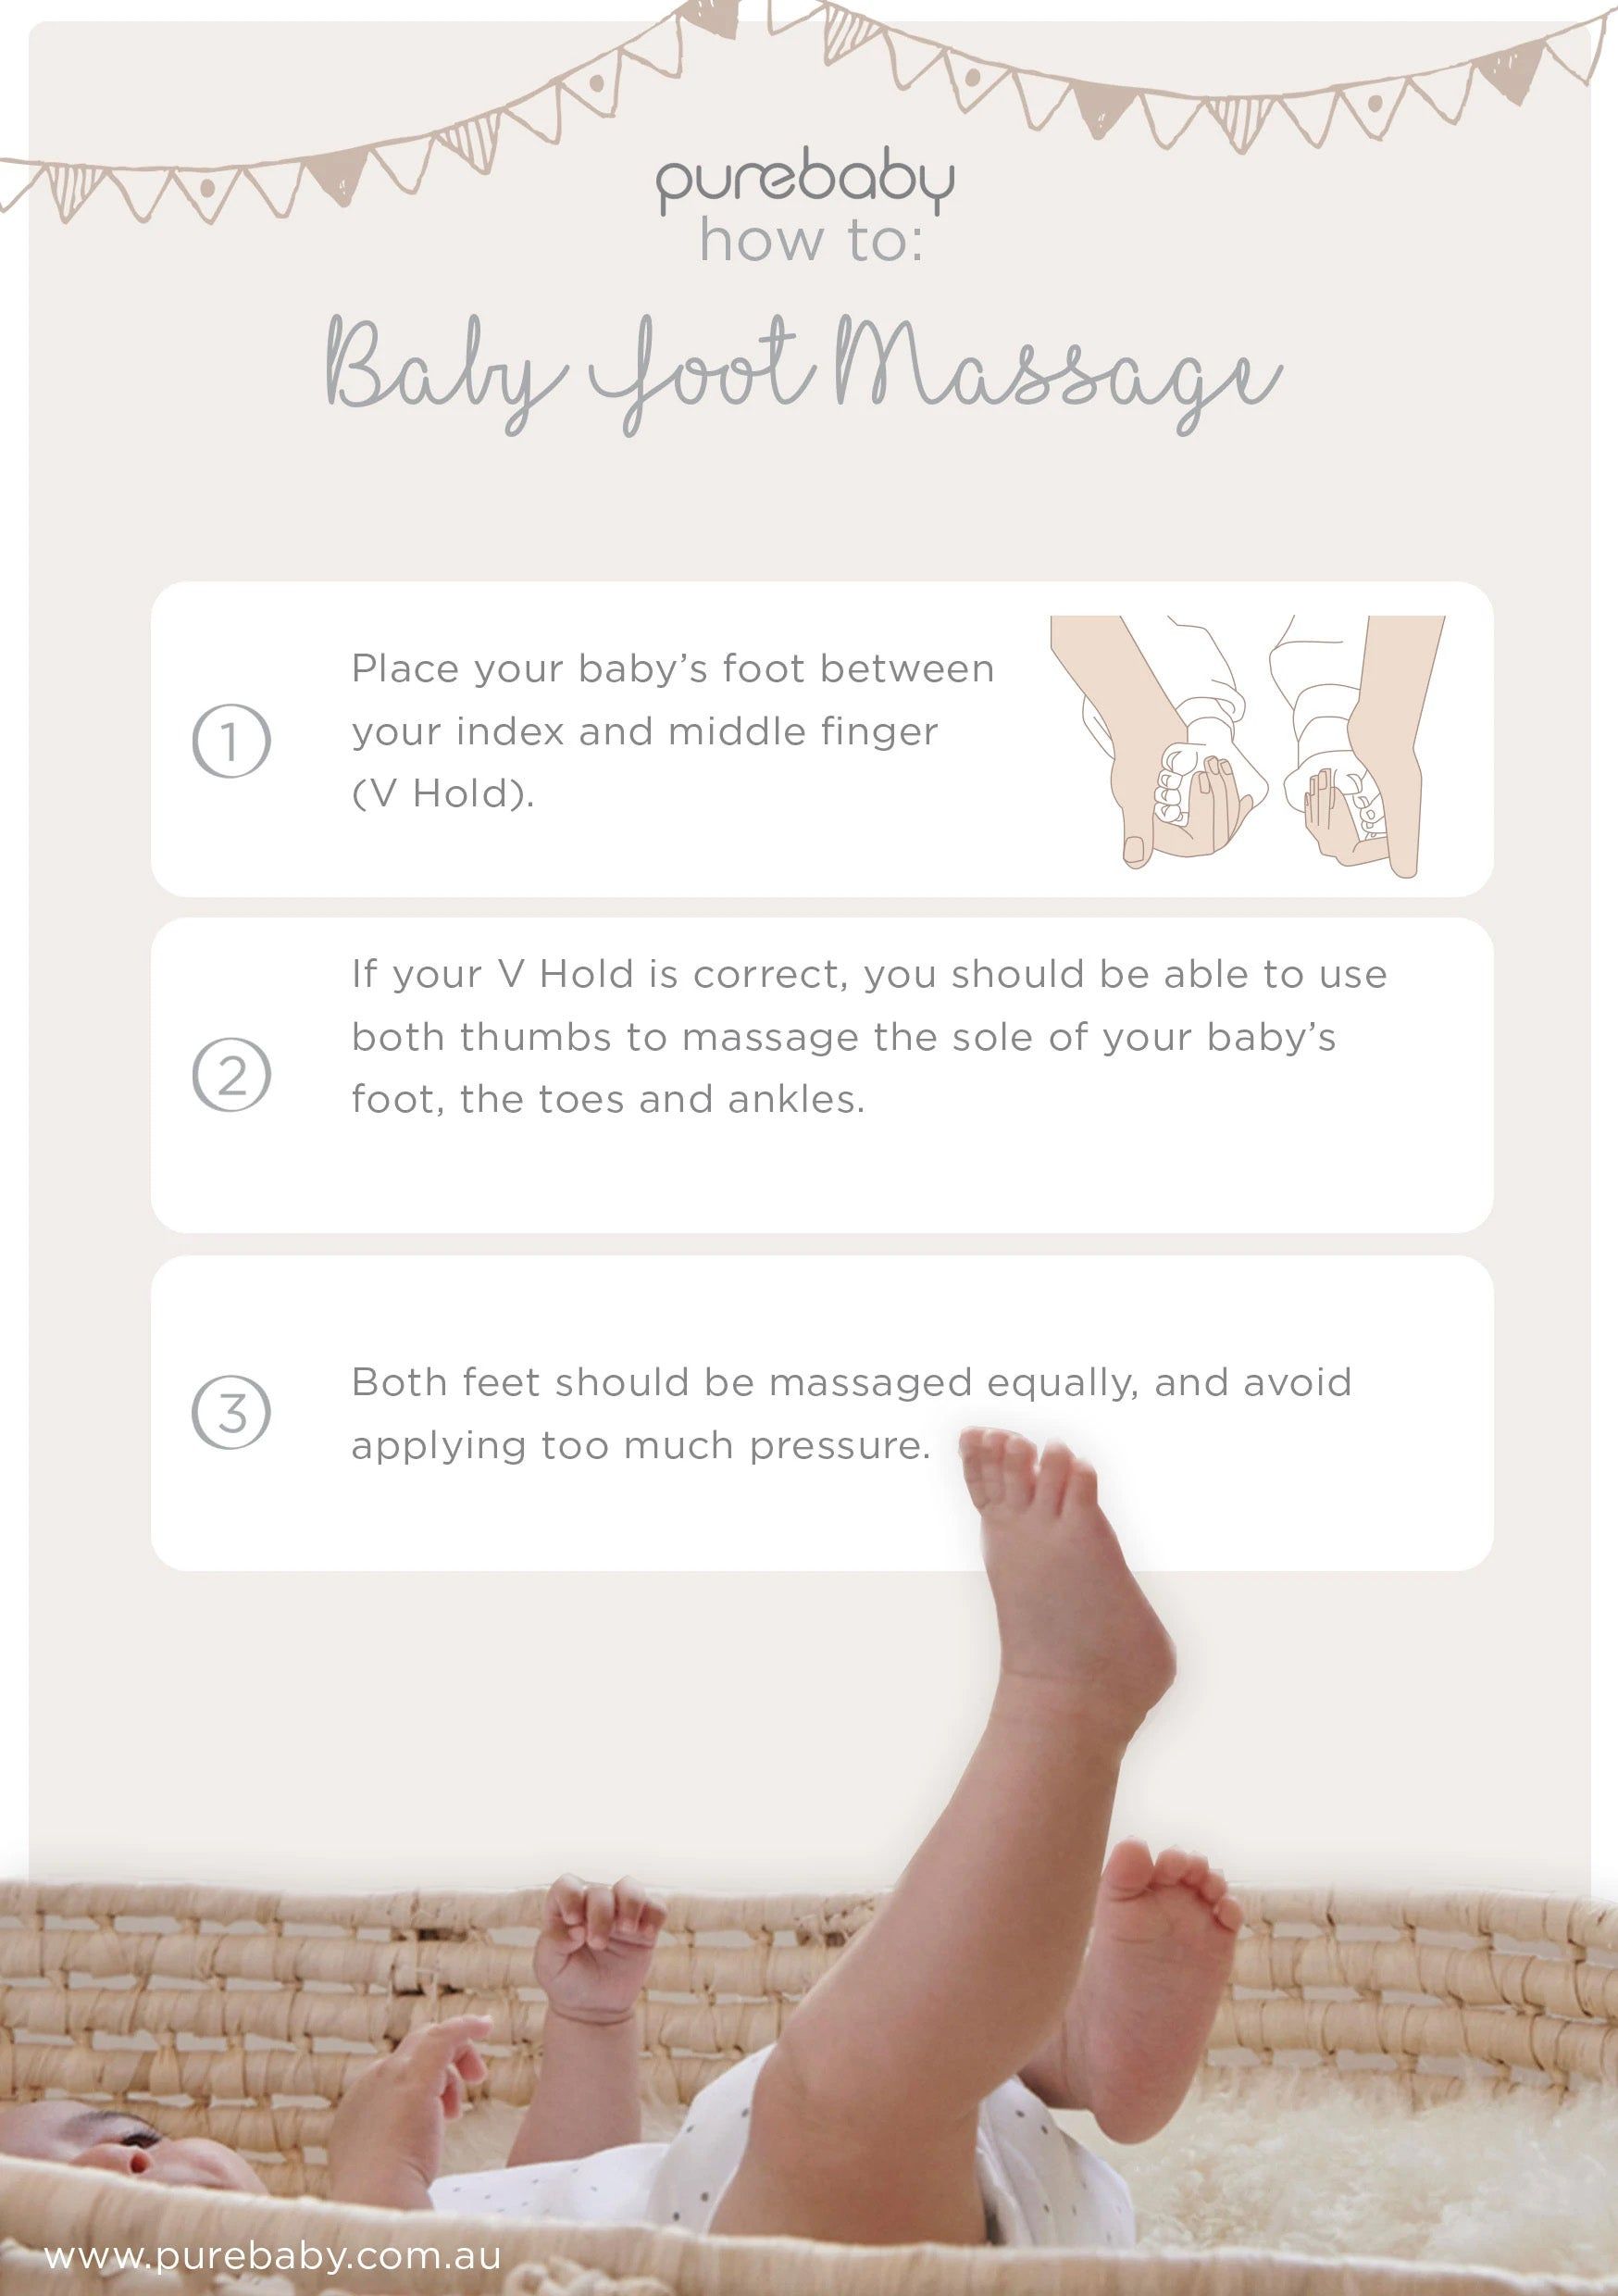 Baby Foot Massage Techniques | Purebaby